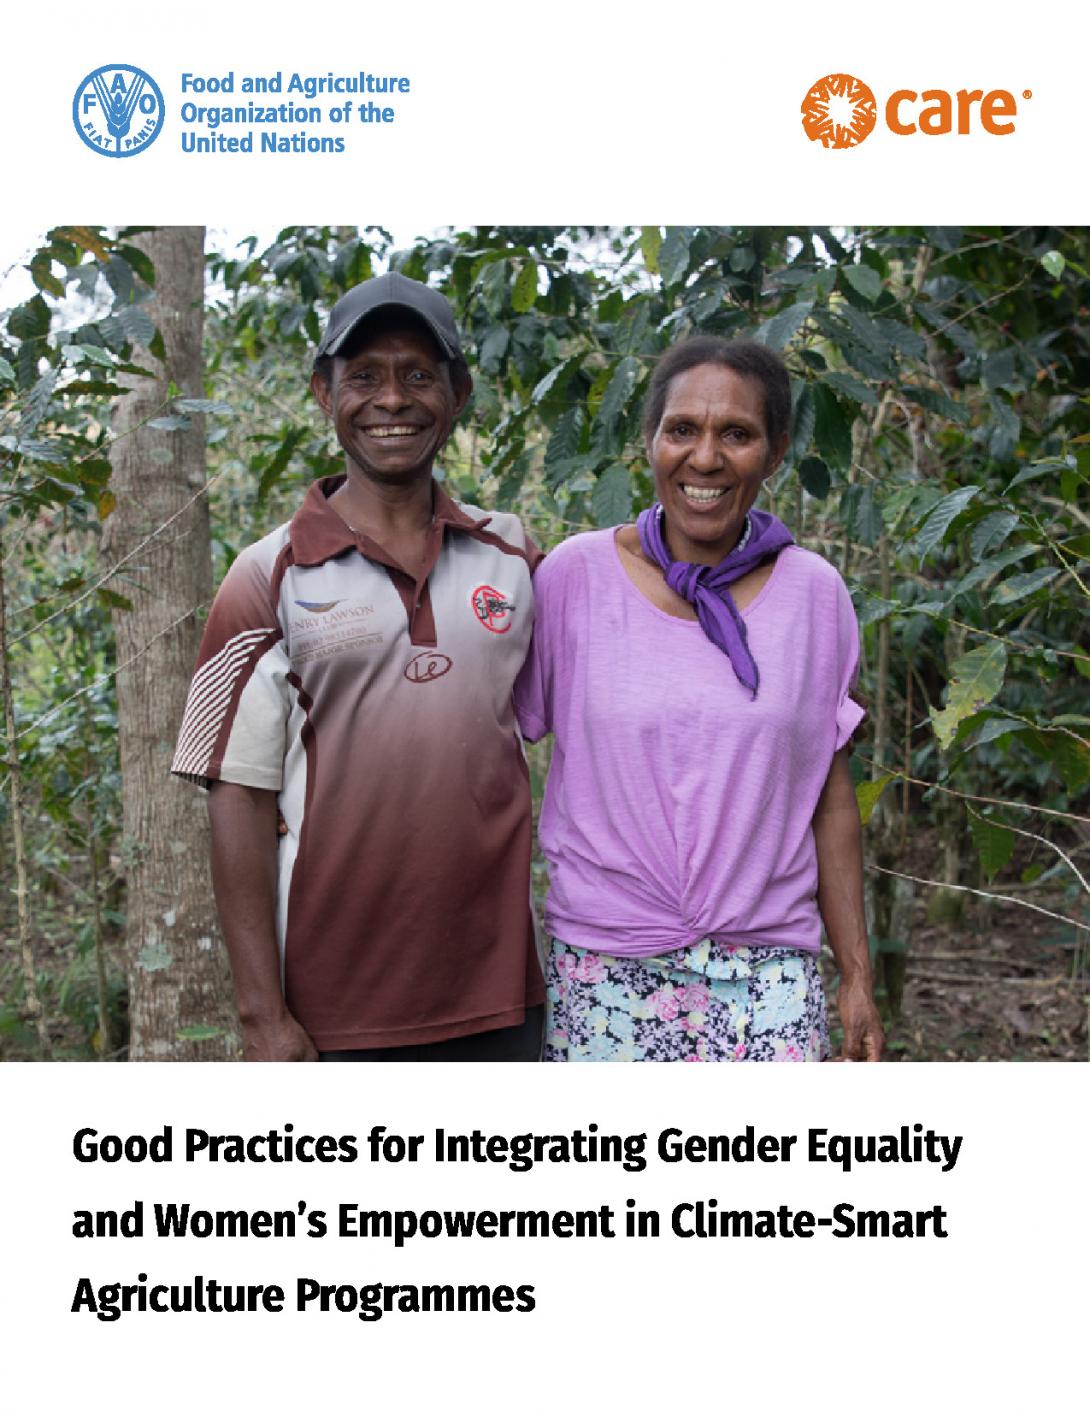 Good Practices for Integrating Gender Equality and Women’s Empowerment in Climate-Smart Agriculture Programmes